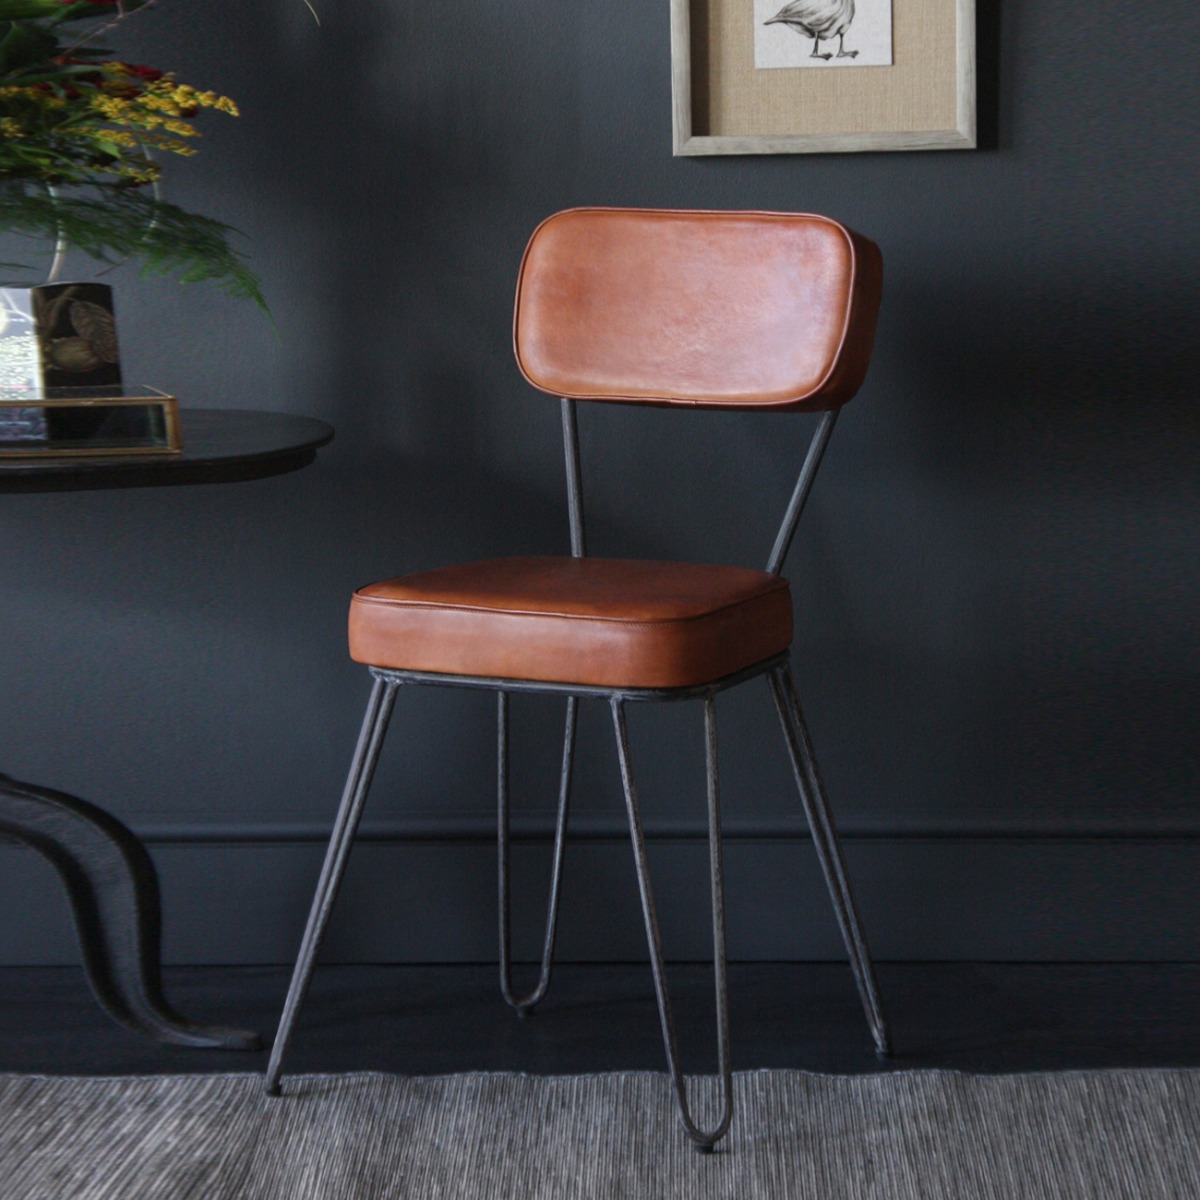 Our Hairpin Chair is a refreshingly mid-century look.